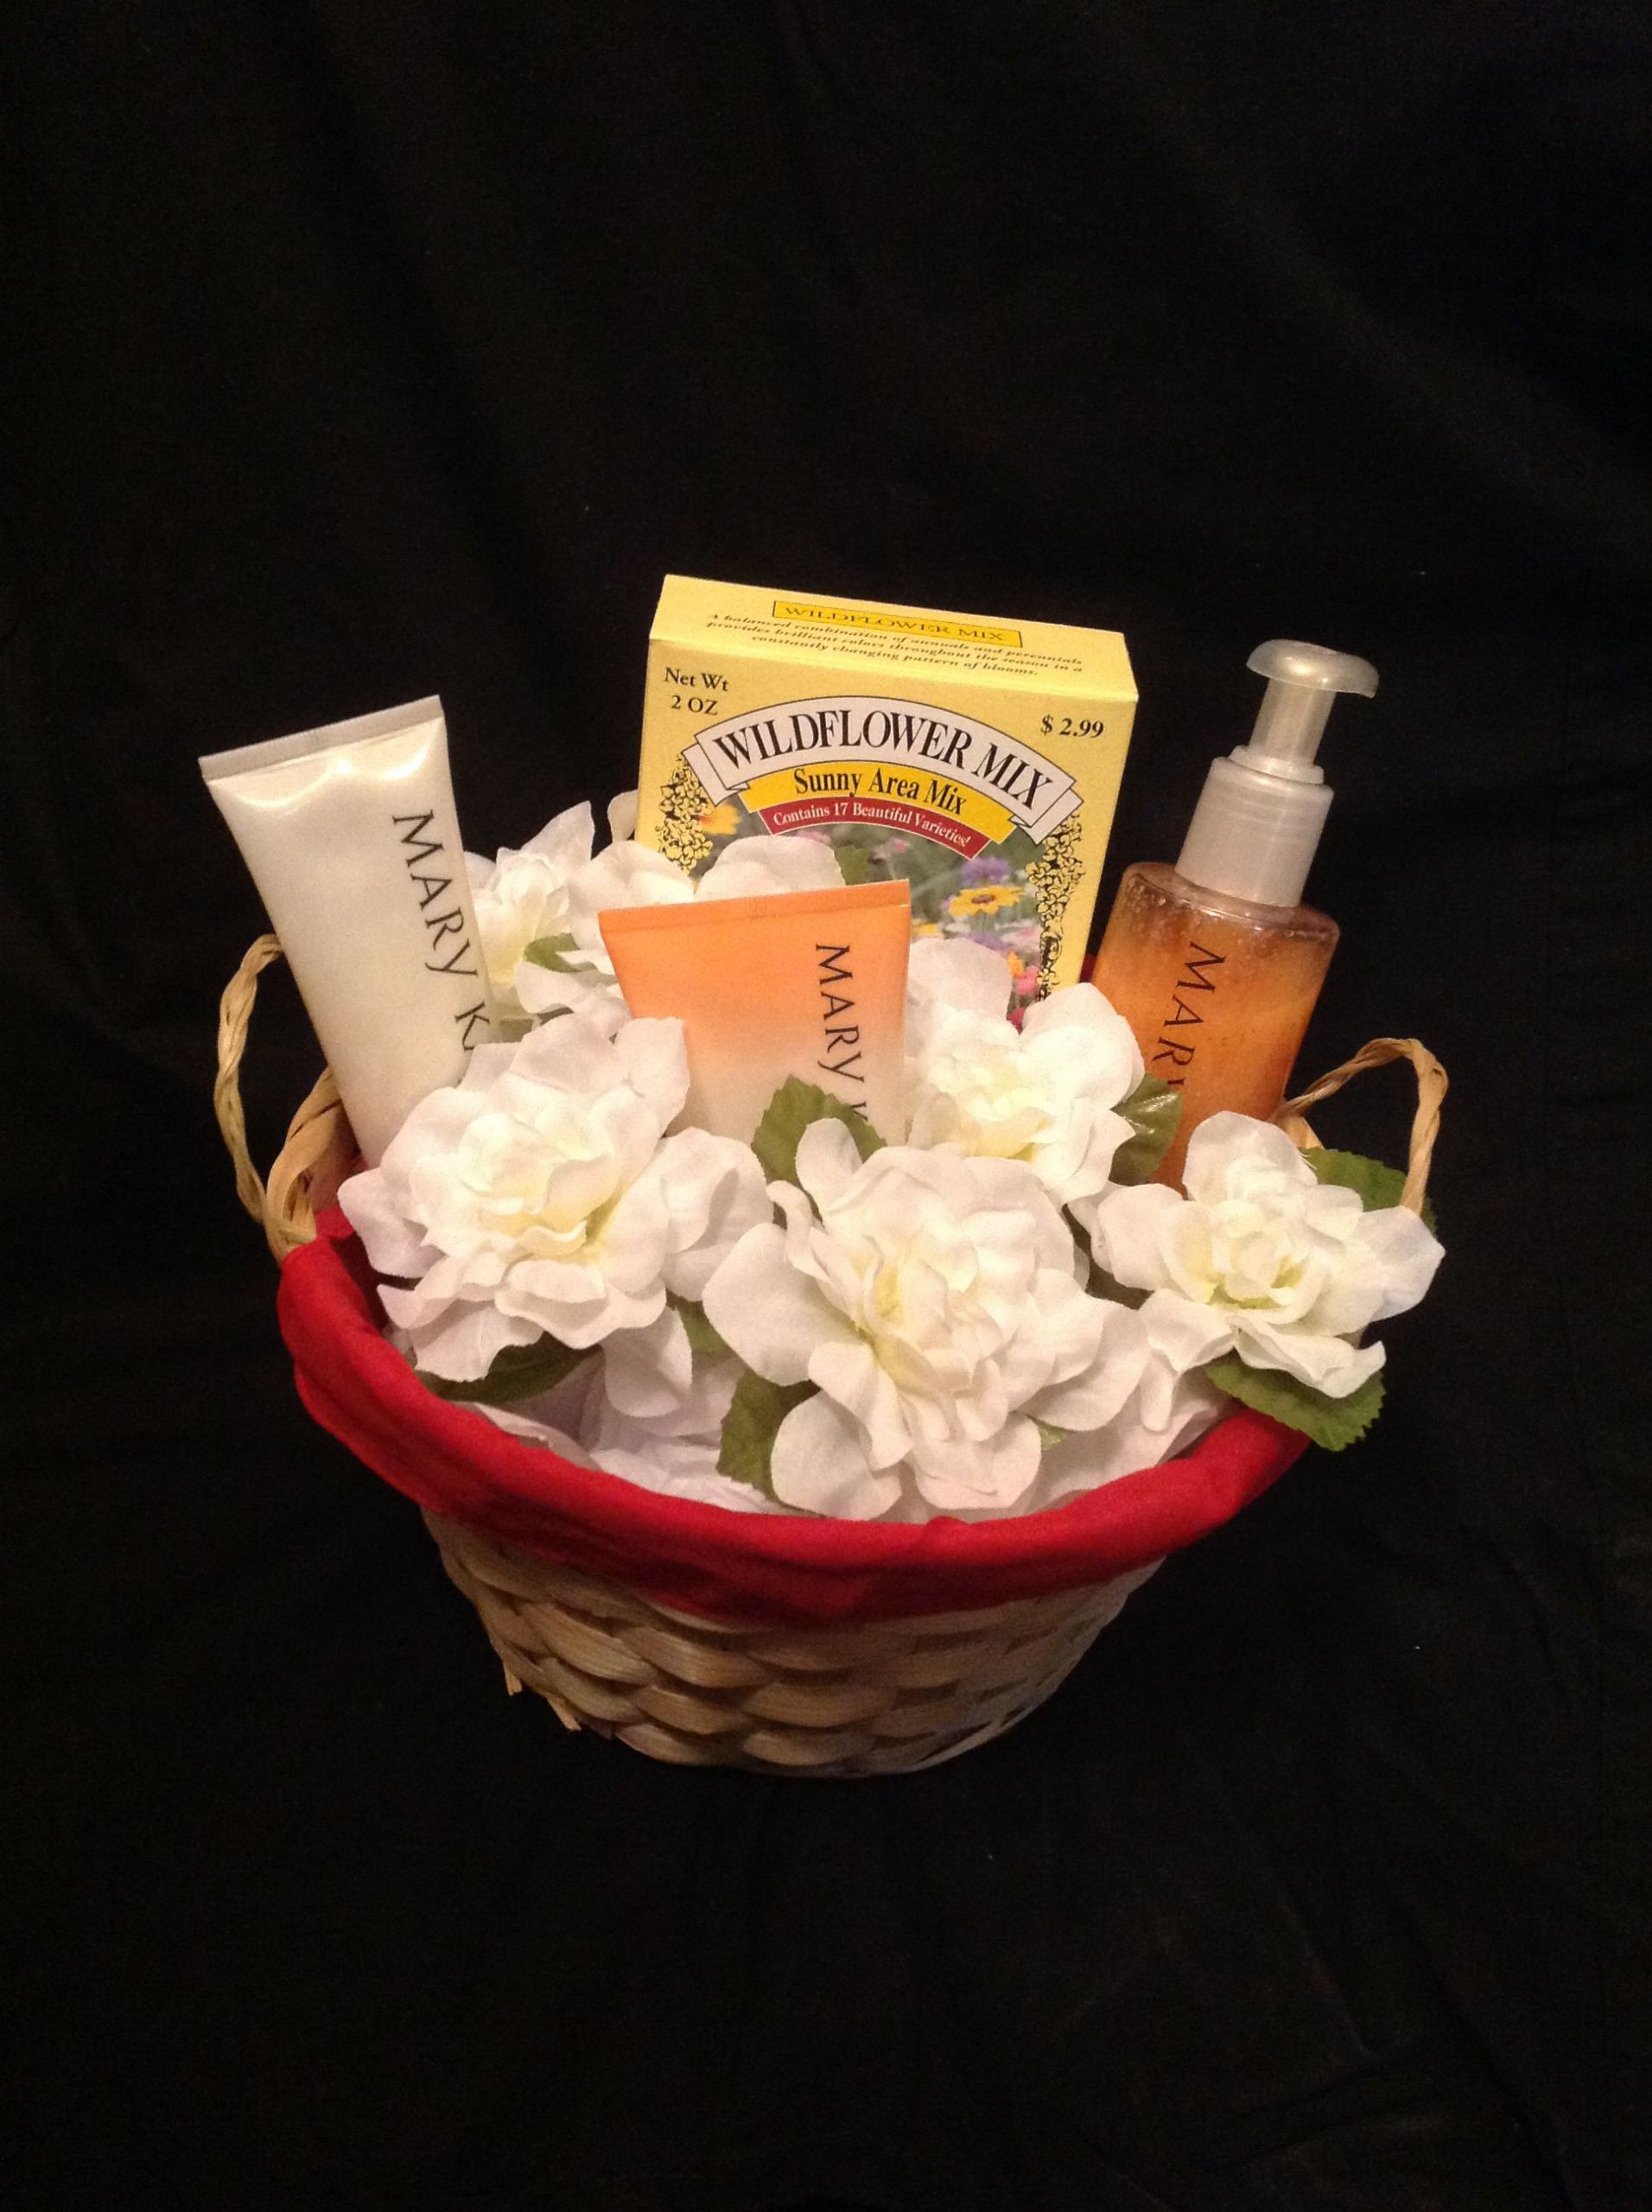 Mary Kay Mother'S Day Gift Basket Ideas
 Pin by Mary Kay on Mary Kay ideas